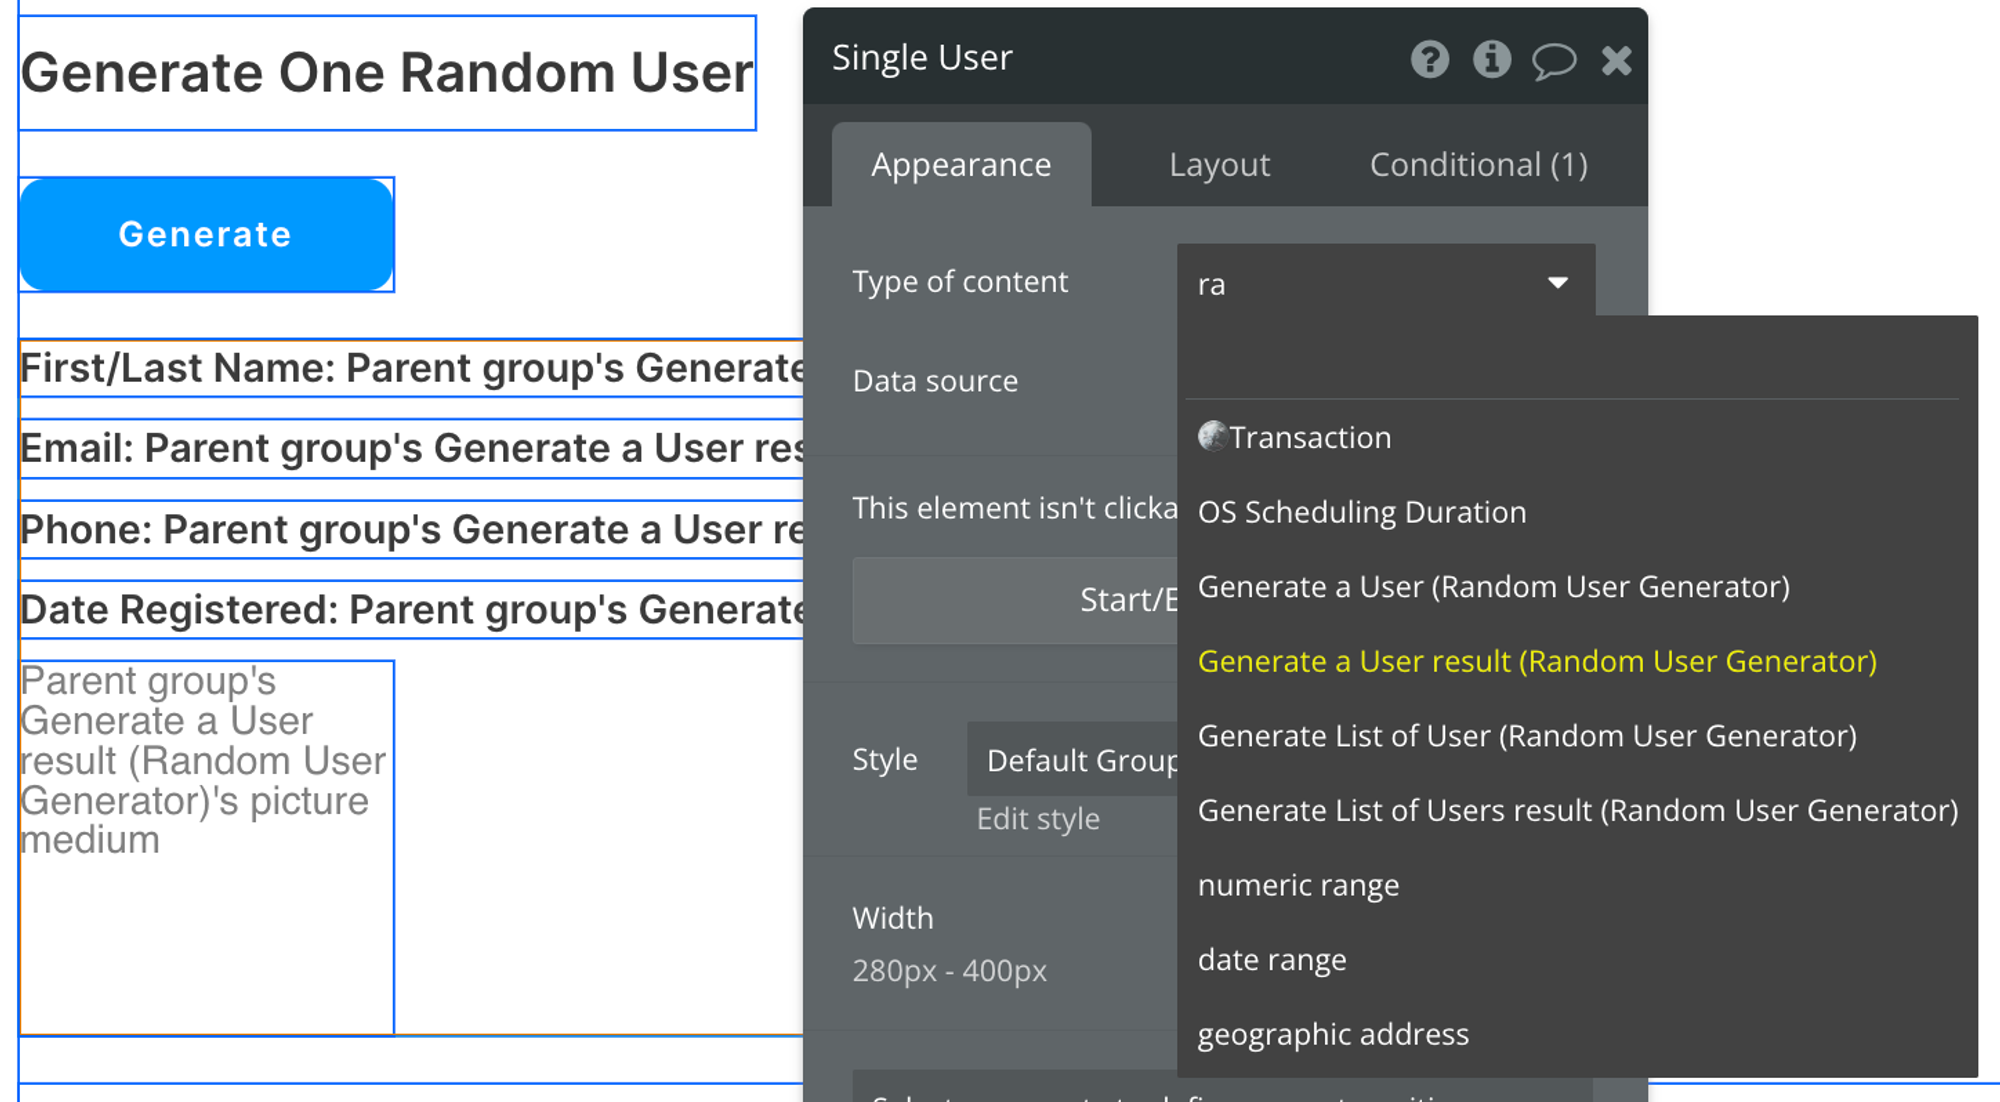 Select Generate a User result (Random User Generator) as the type of content for this group